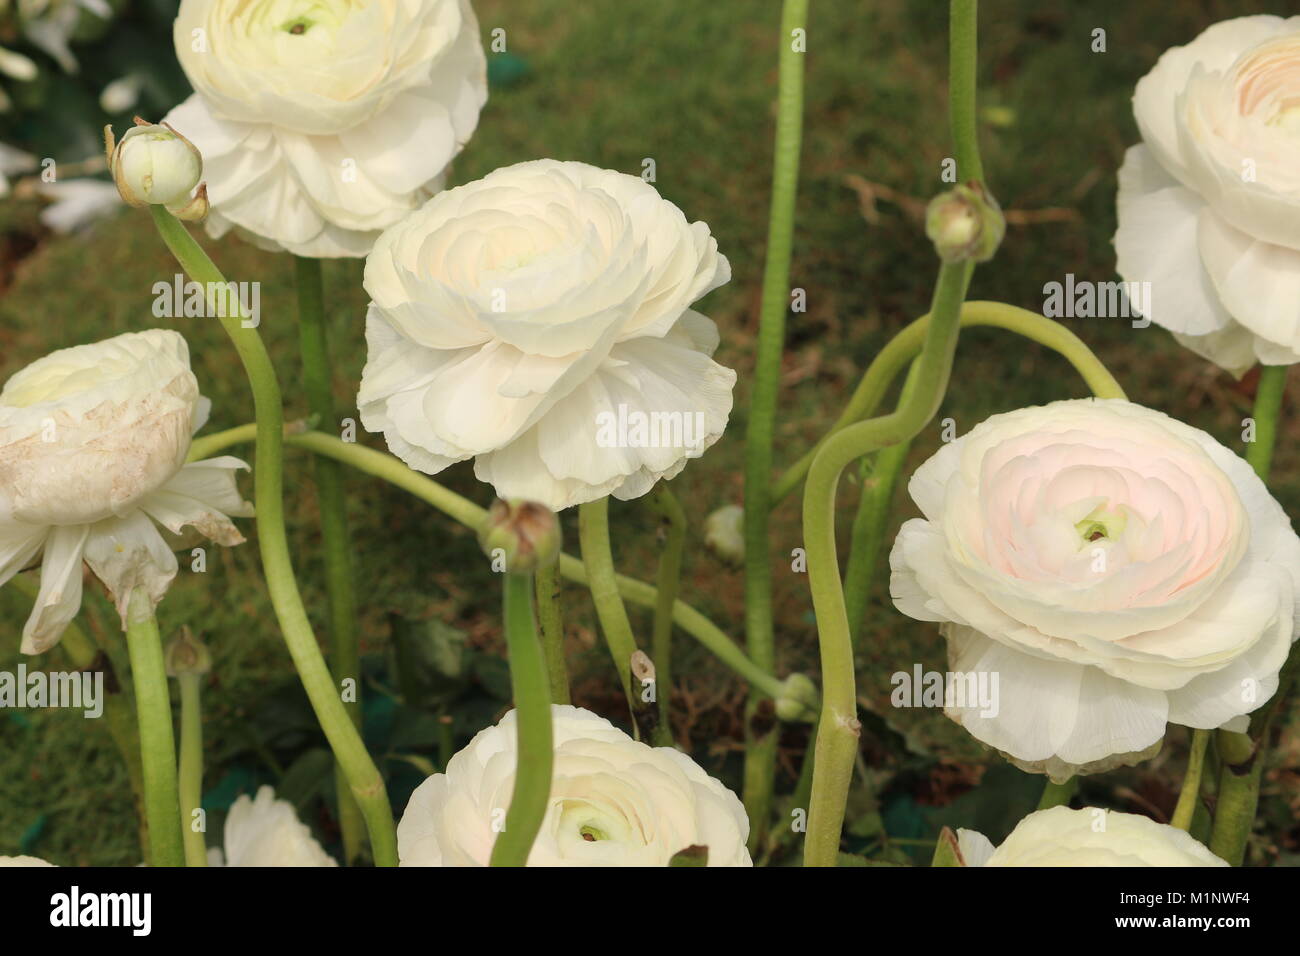 group of Ranunculus asiaticus White flowers with tightly clustered petals Stock Photo